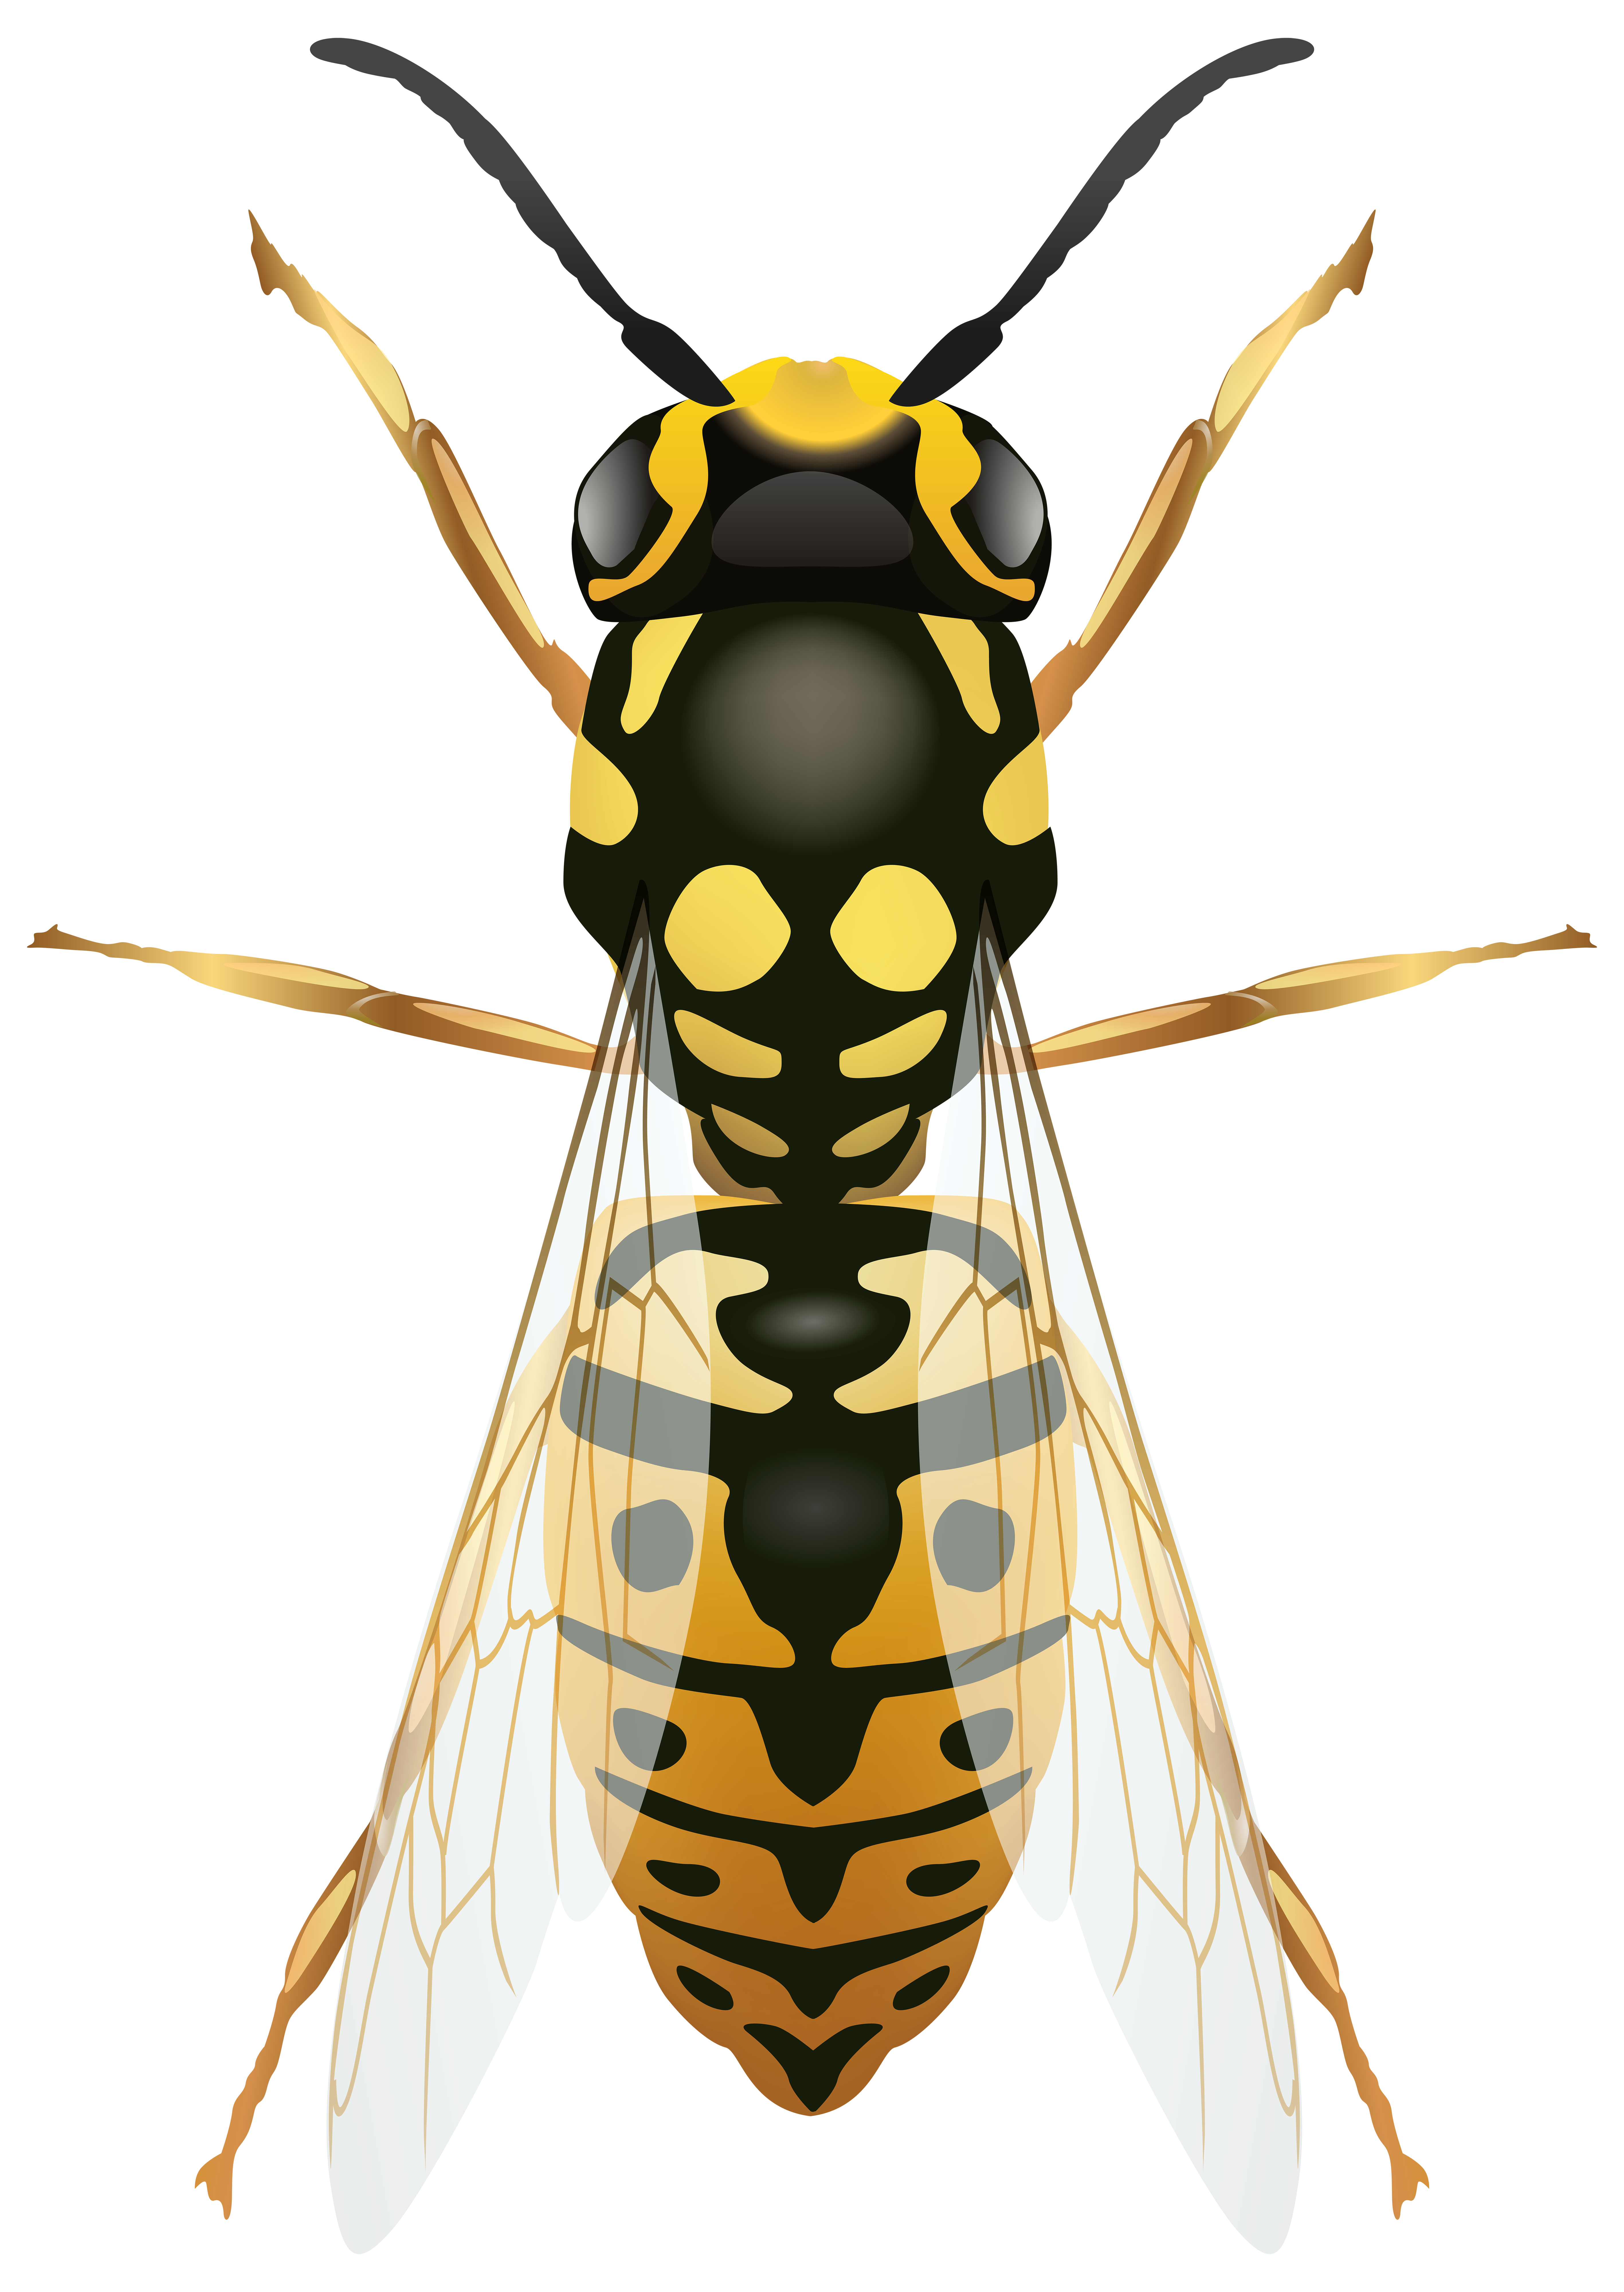 Hornet Insect No Background